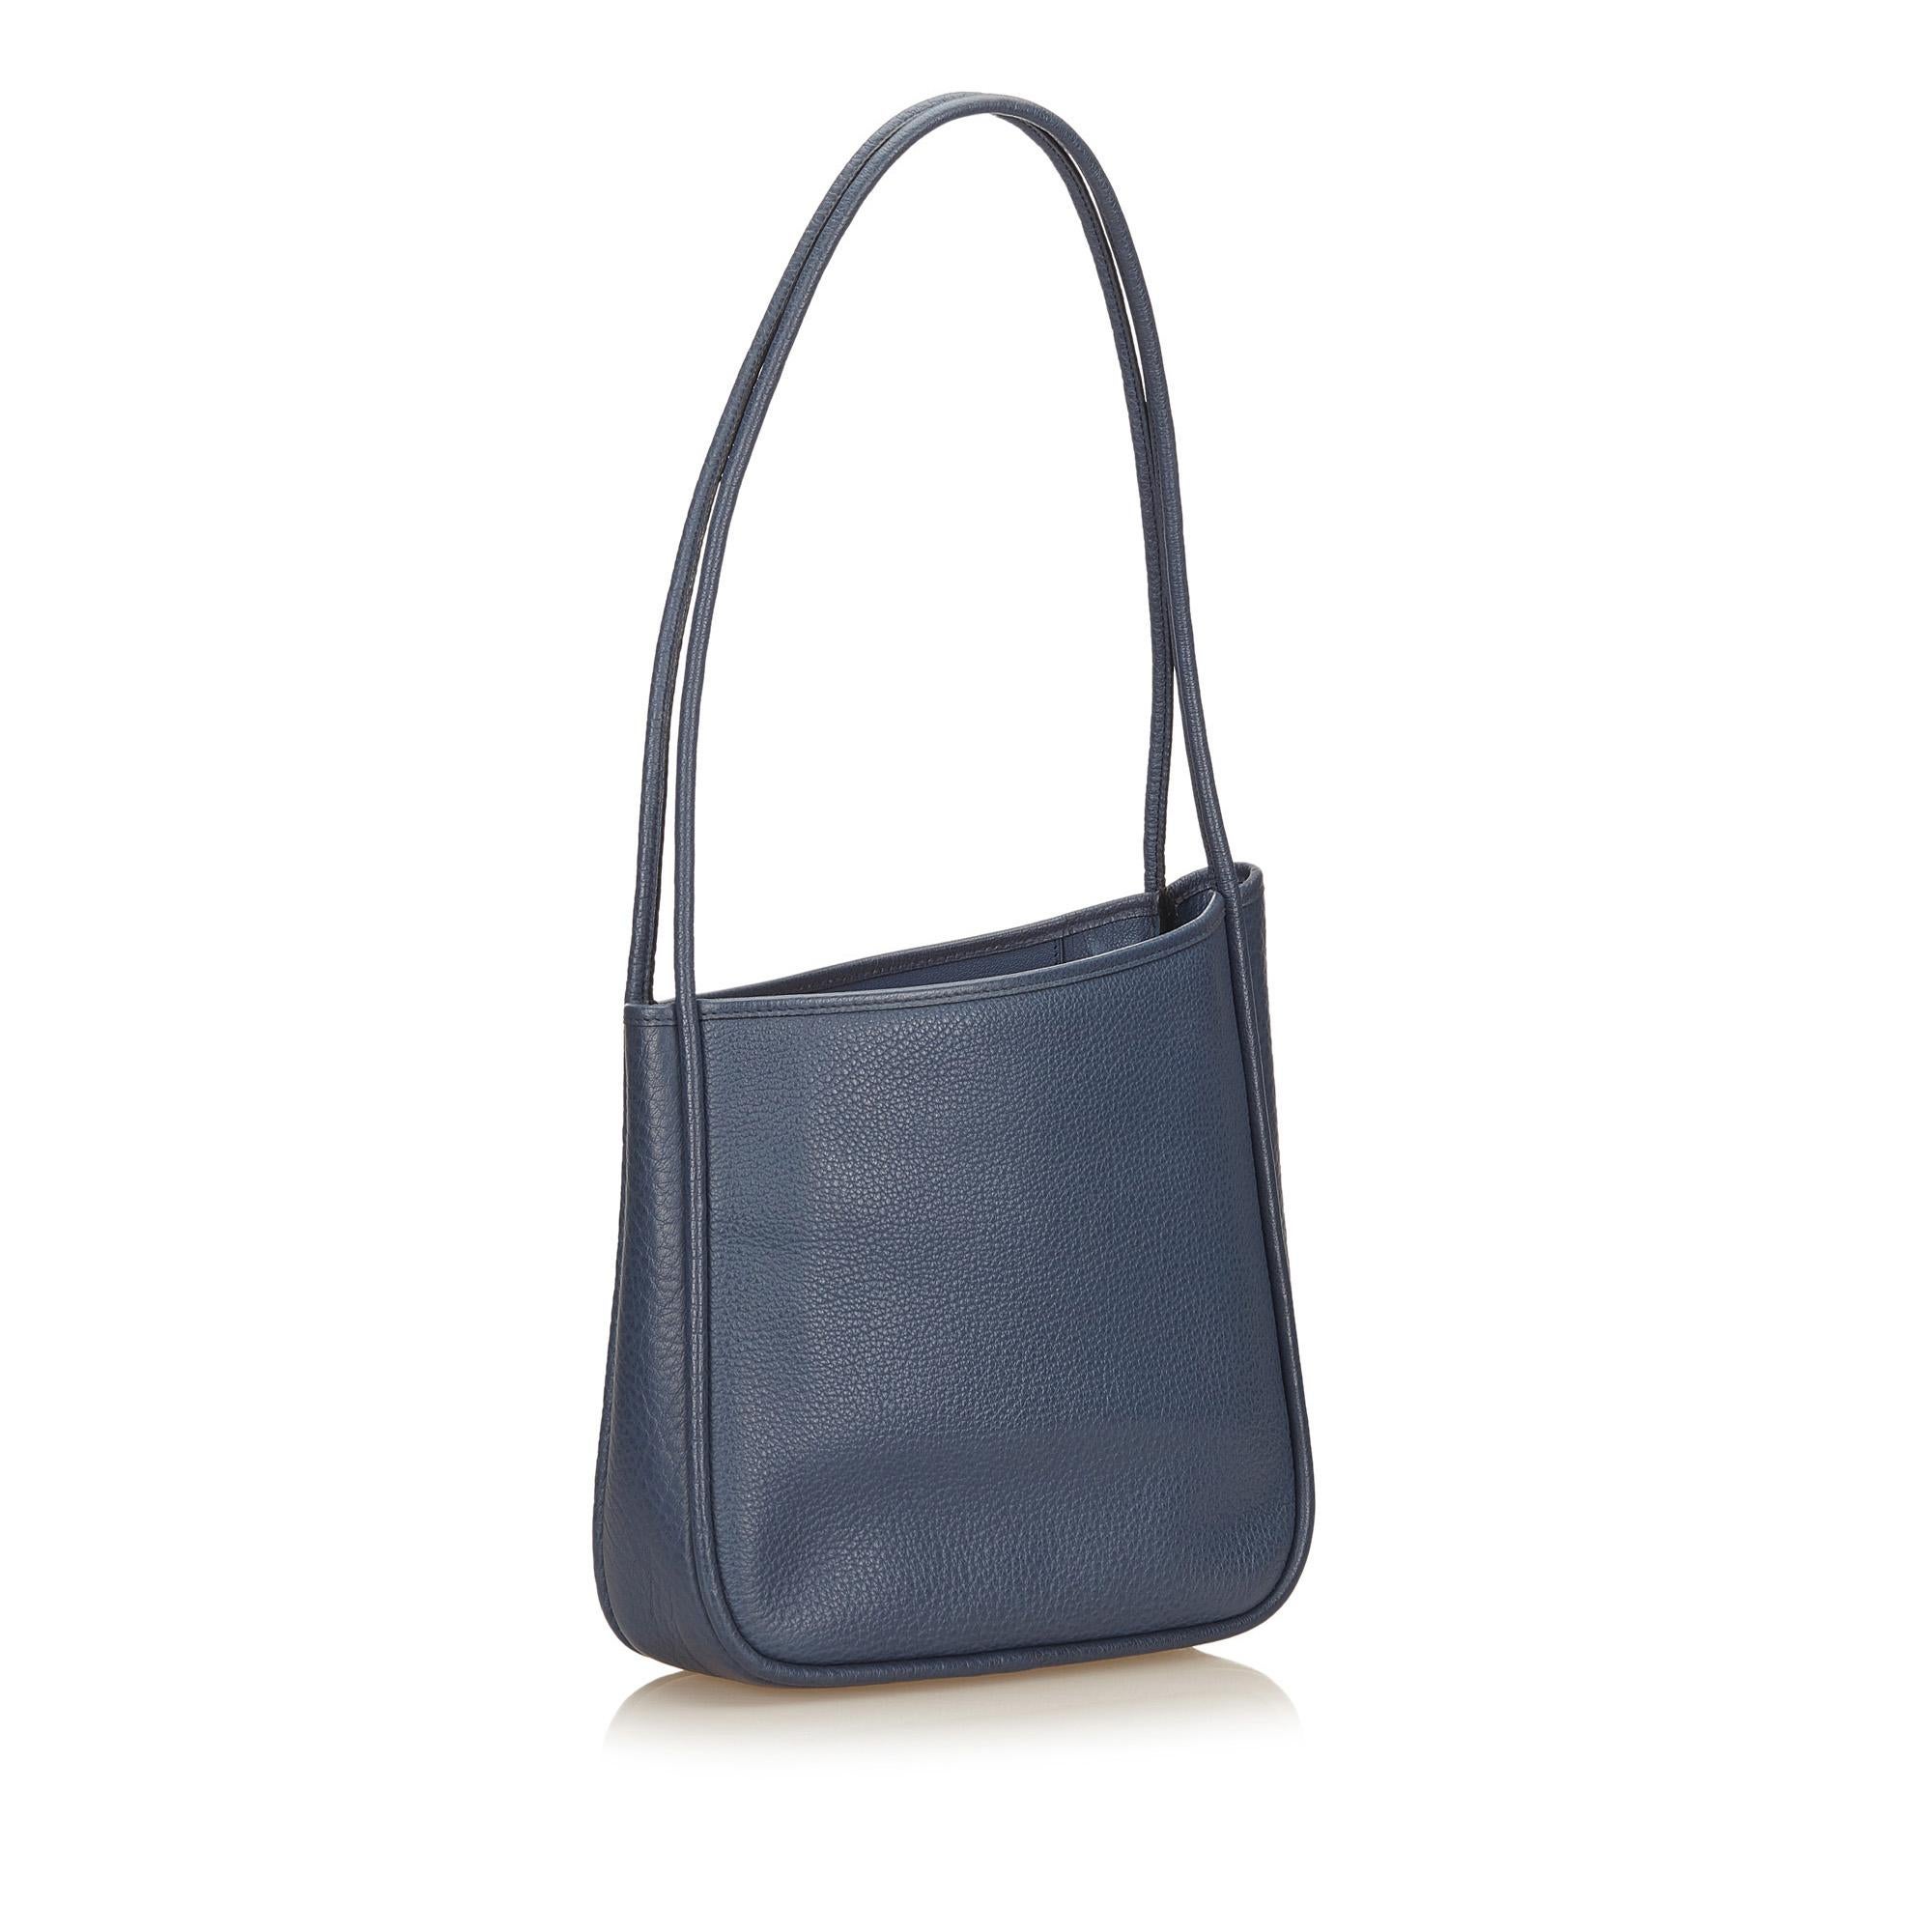 The Nami Tote features a leather body, rolled leather straps, open top, and interior zip and slip pocket. It carries as AB condition rating.

Inclusions: 
This item does not come with inclusions.

Dimensions:
Length: 28.00 cm
Width: 26.00 cm
Depth: